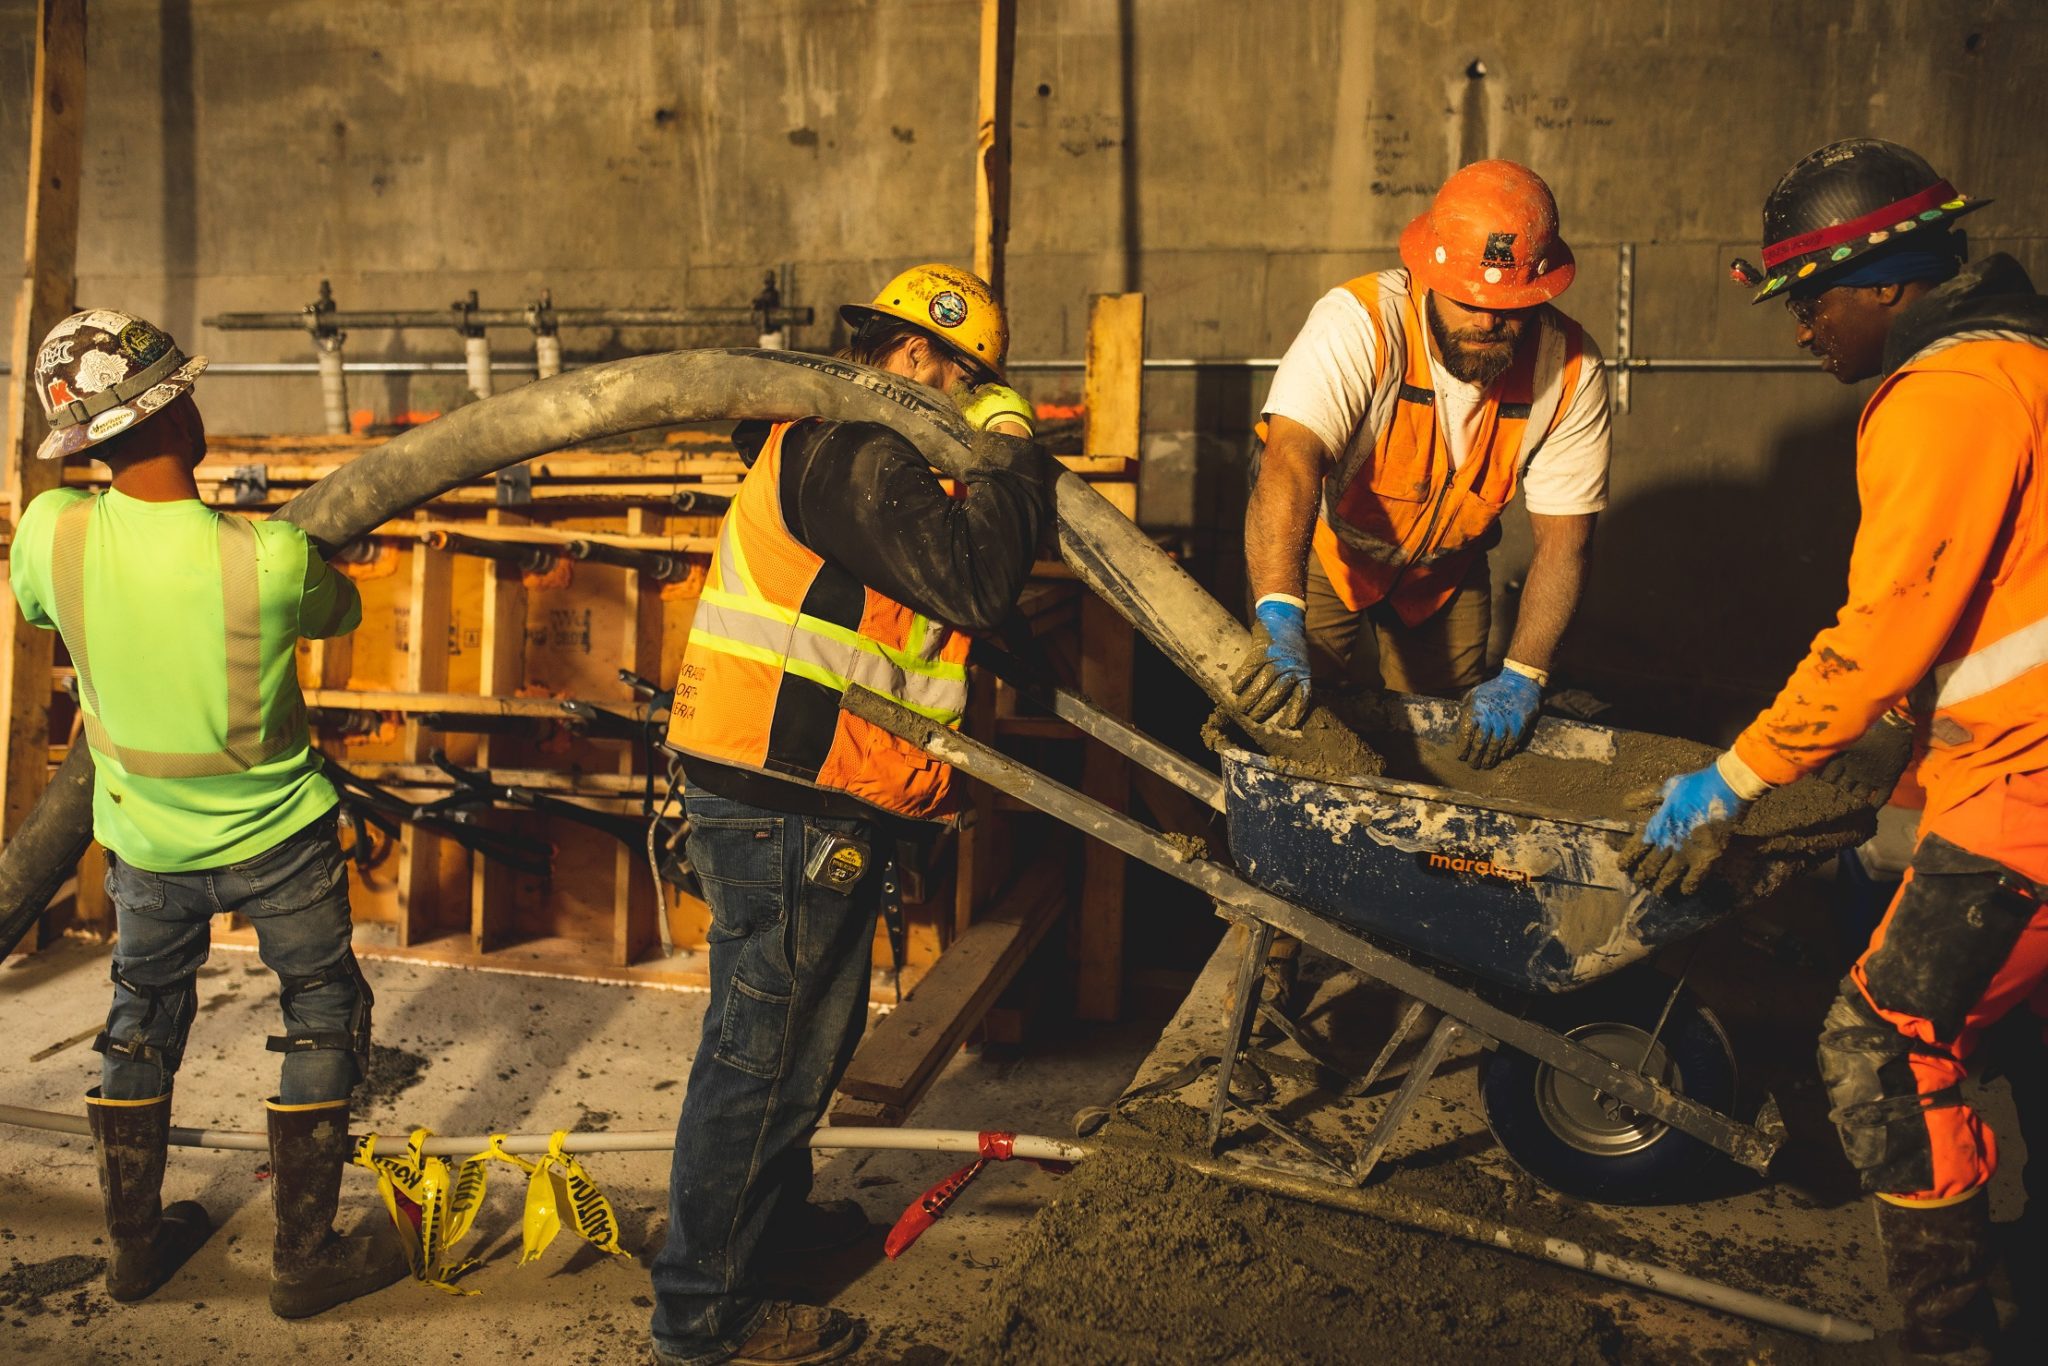 Construction workers pour concrete inside the West Seattle Bridge as part of the bridge repairs in May 2022. Four people in construction vests and hardhats work around a wheel barrow inside the bridge.